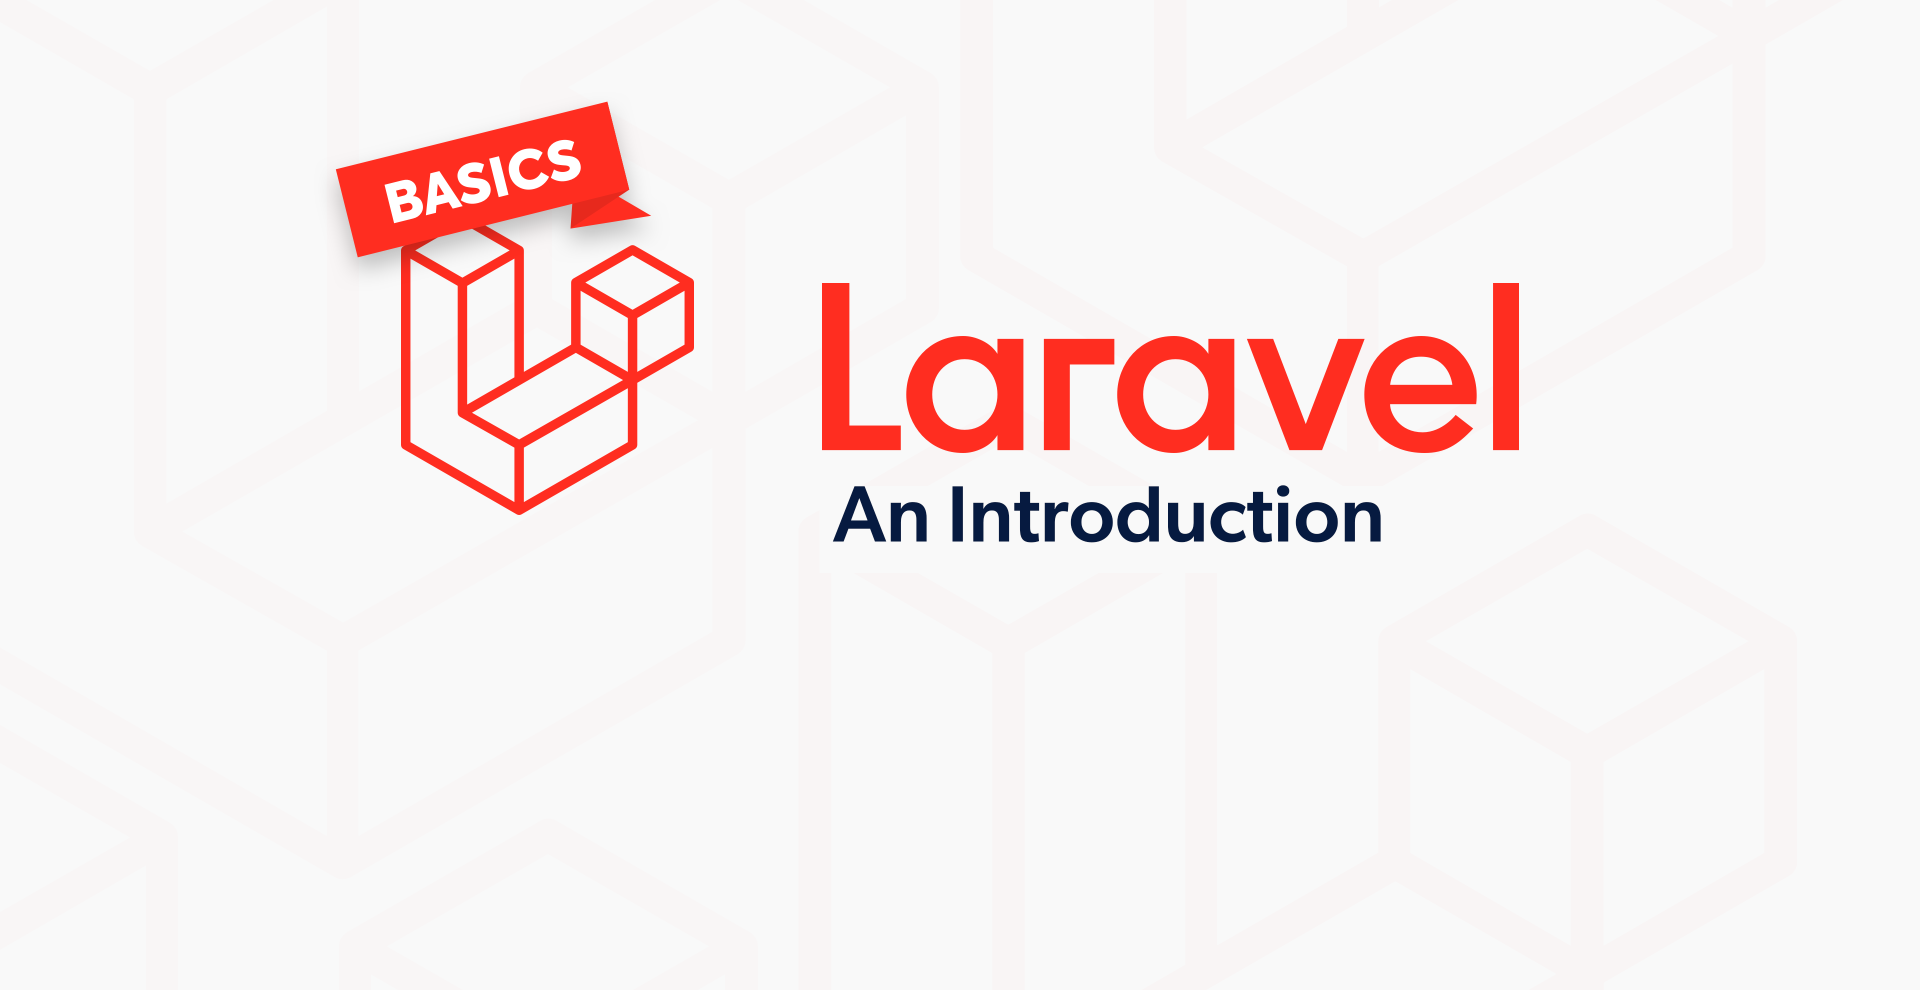 Introduction to the Laravel CMS